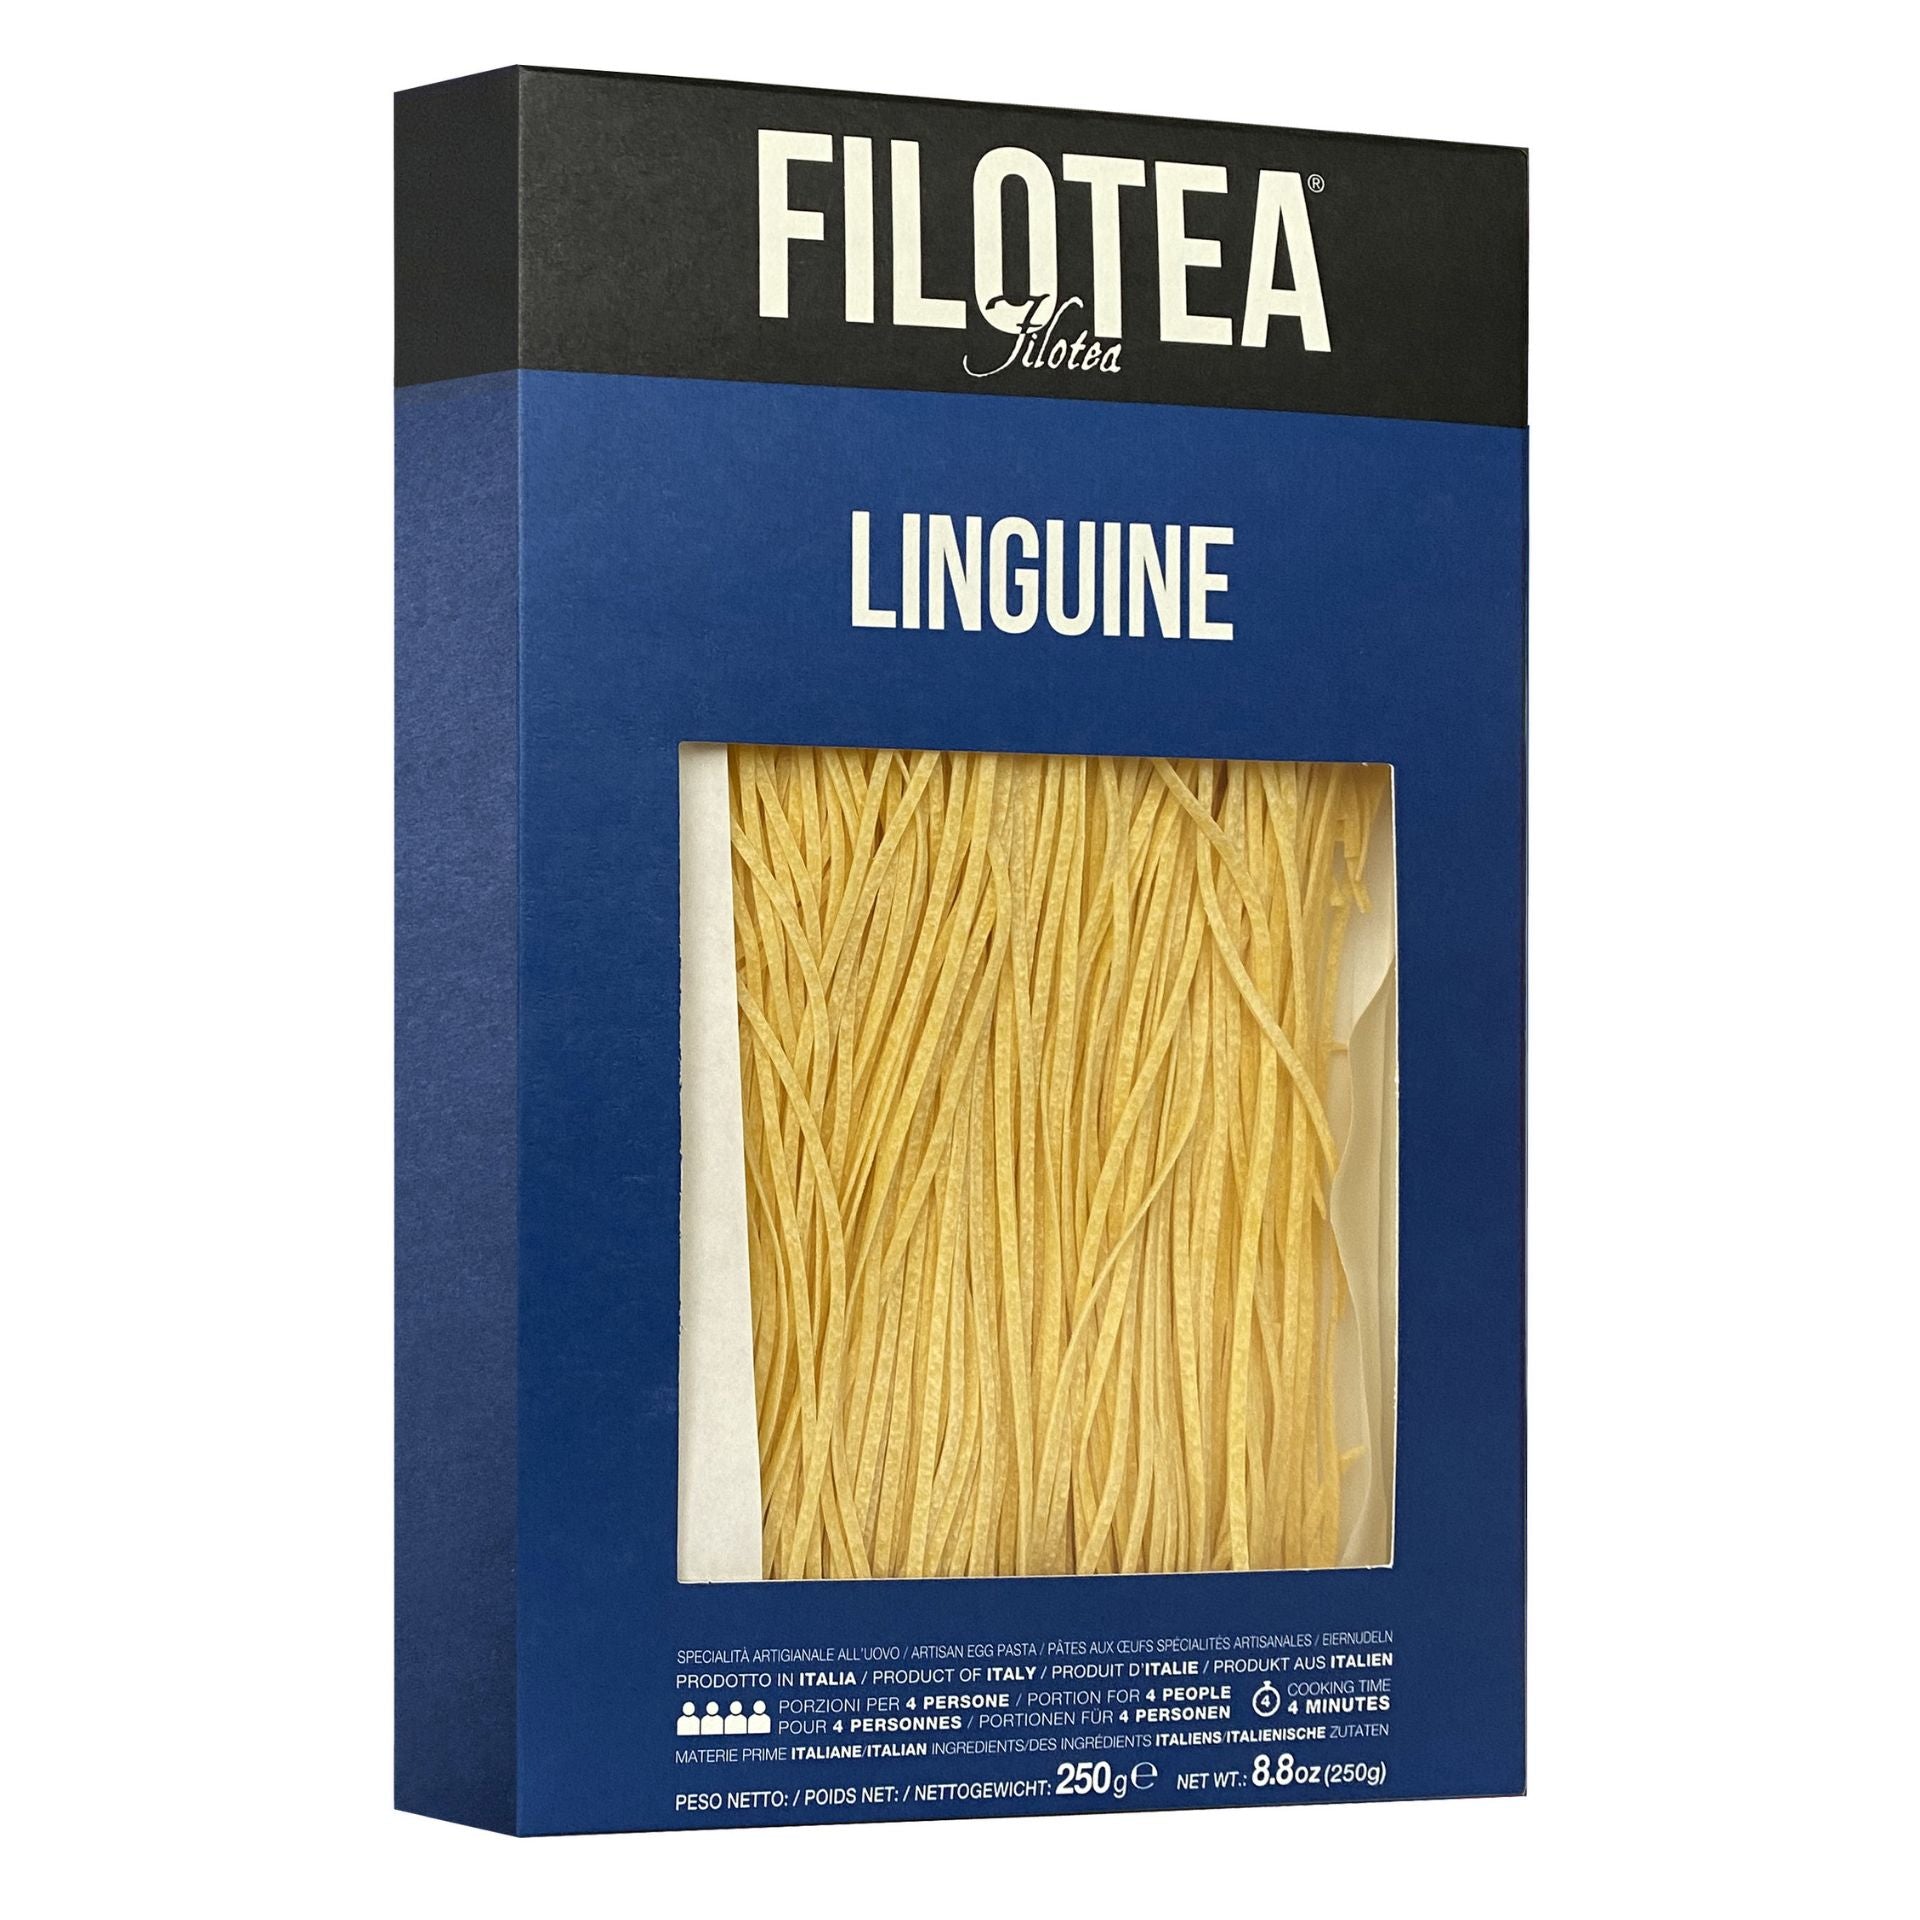 Filotea Linguine Artisan Egg Pasta 250g  | Imported and distributed in the UK by Just Gourmet Foods